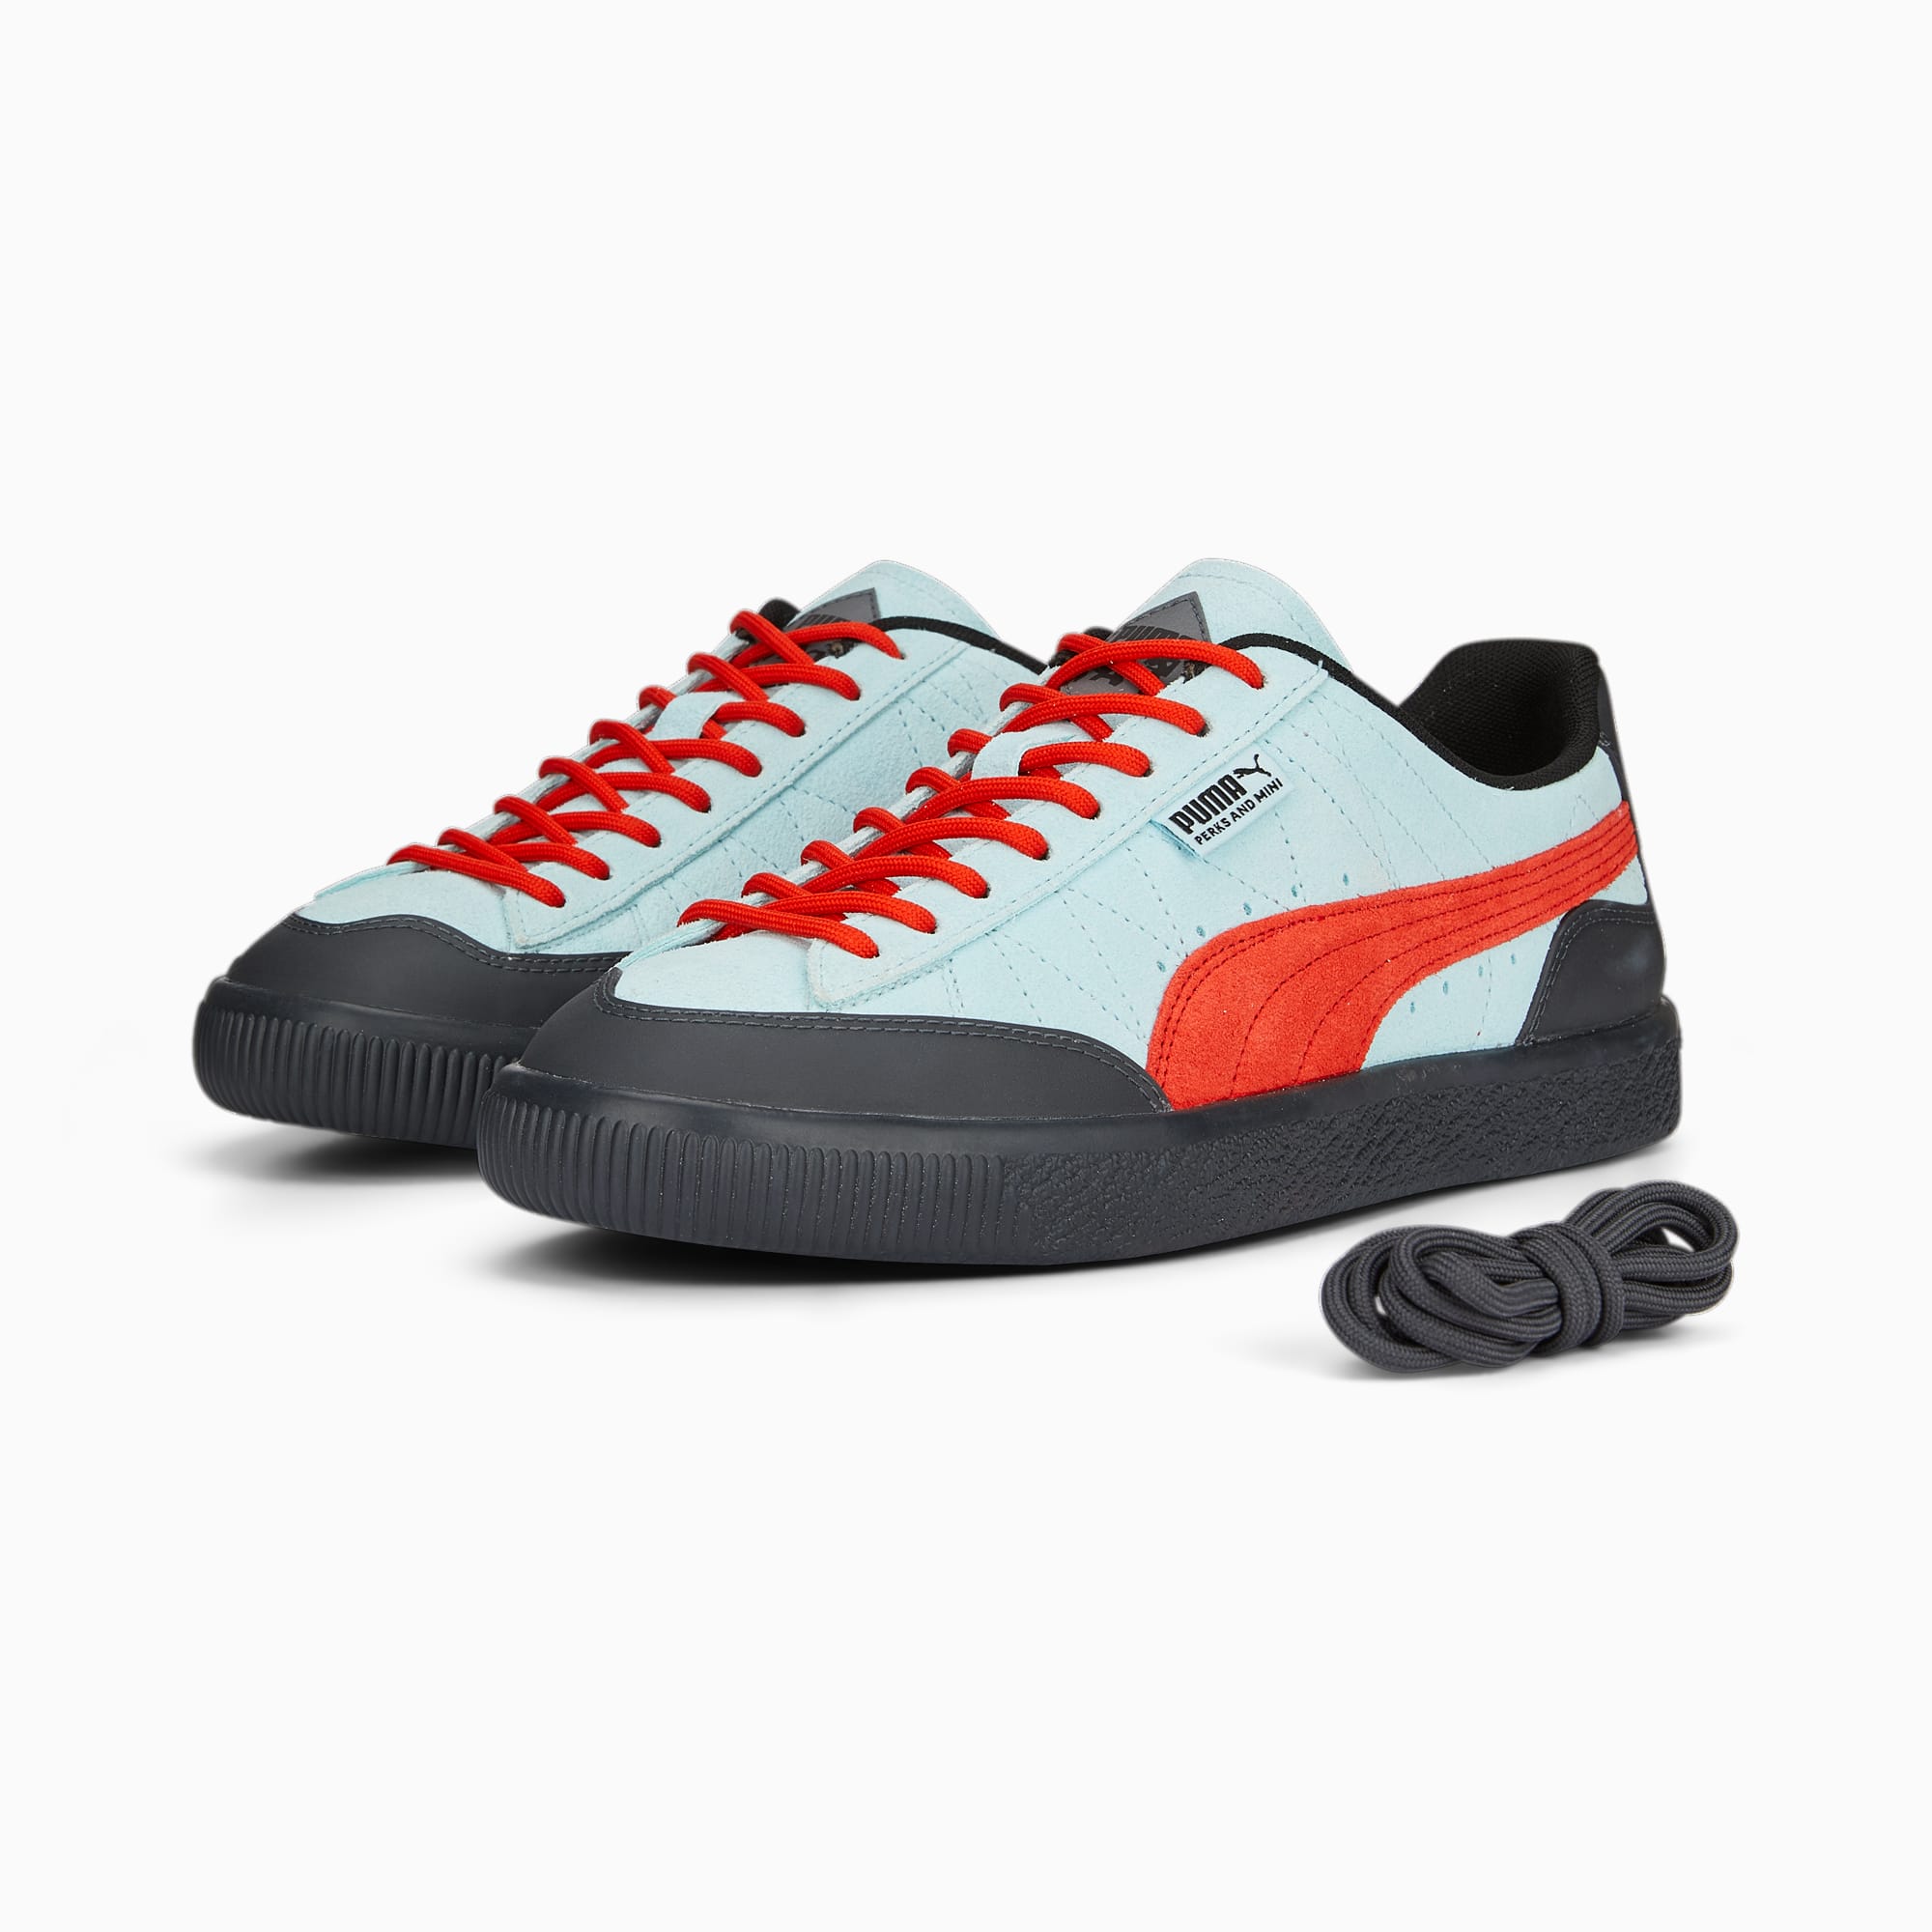 PUMA x PERKS AND MINI Clyde Rubber Sneakers